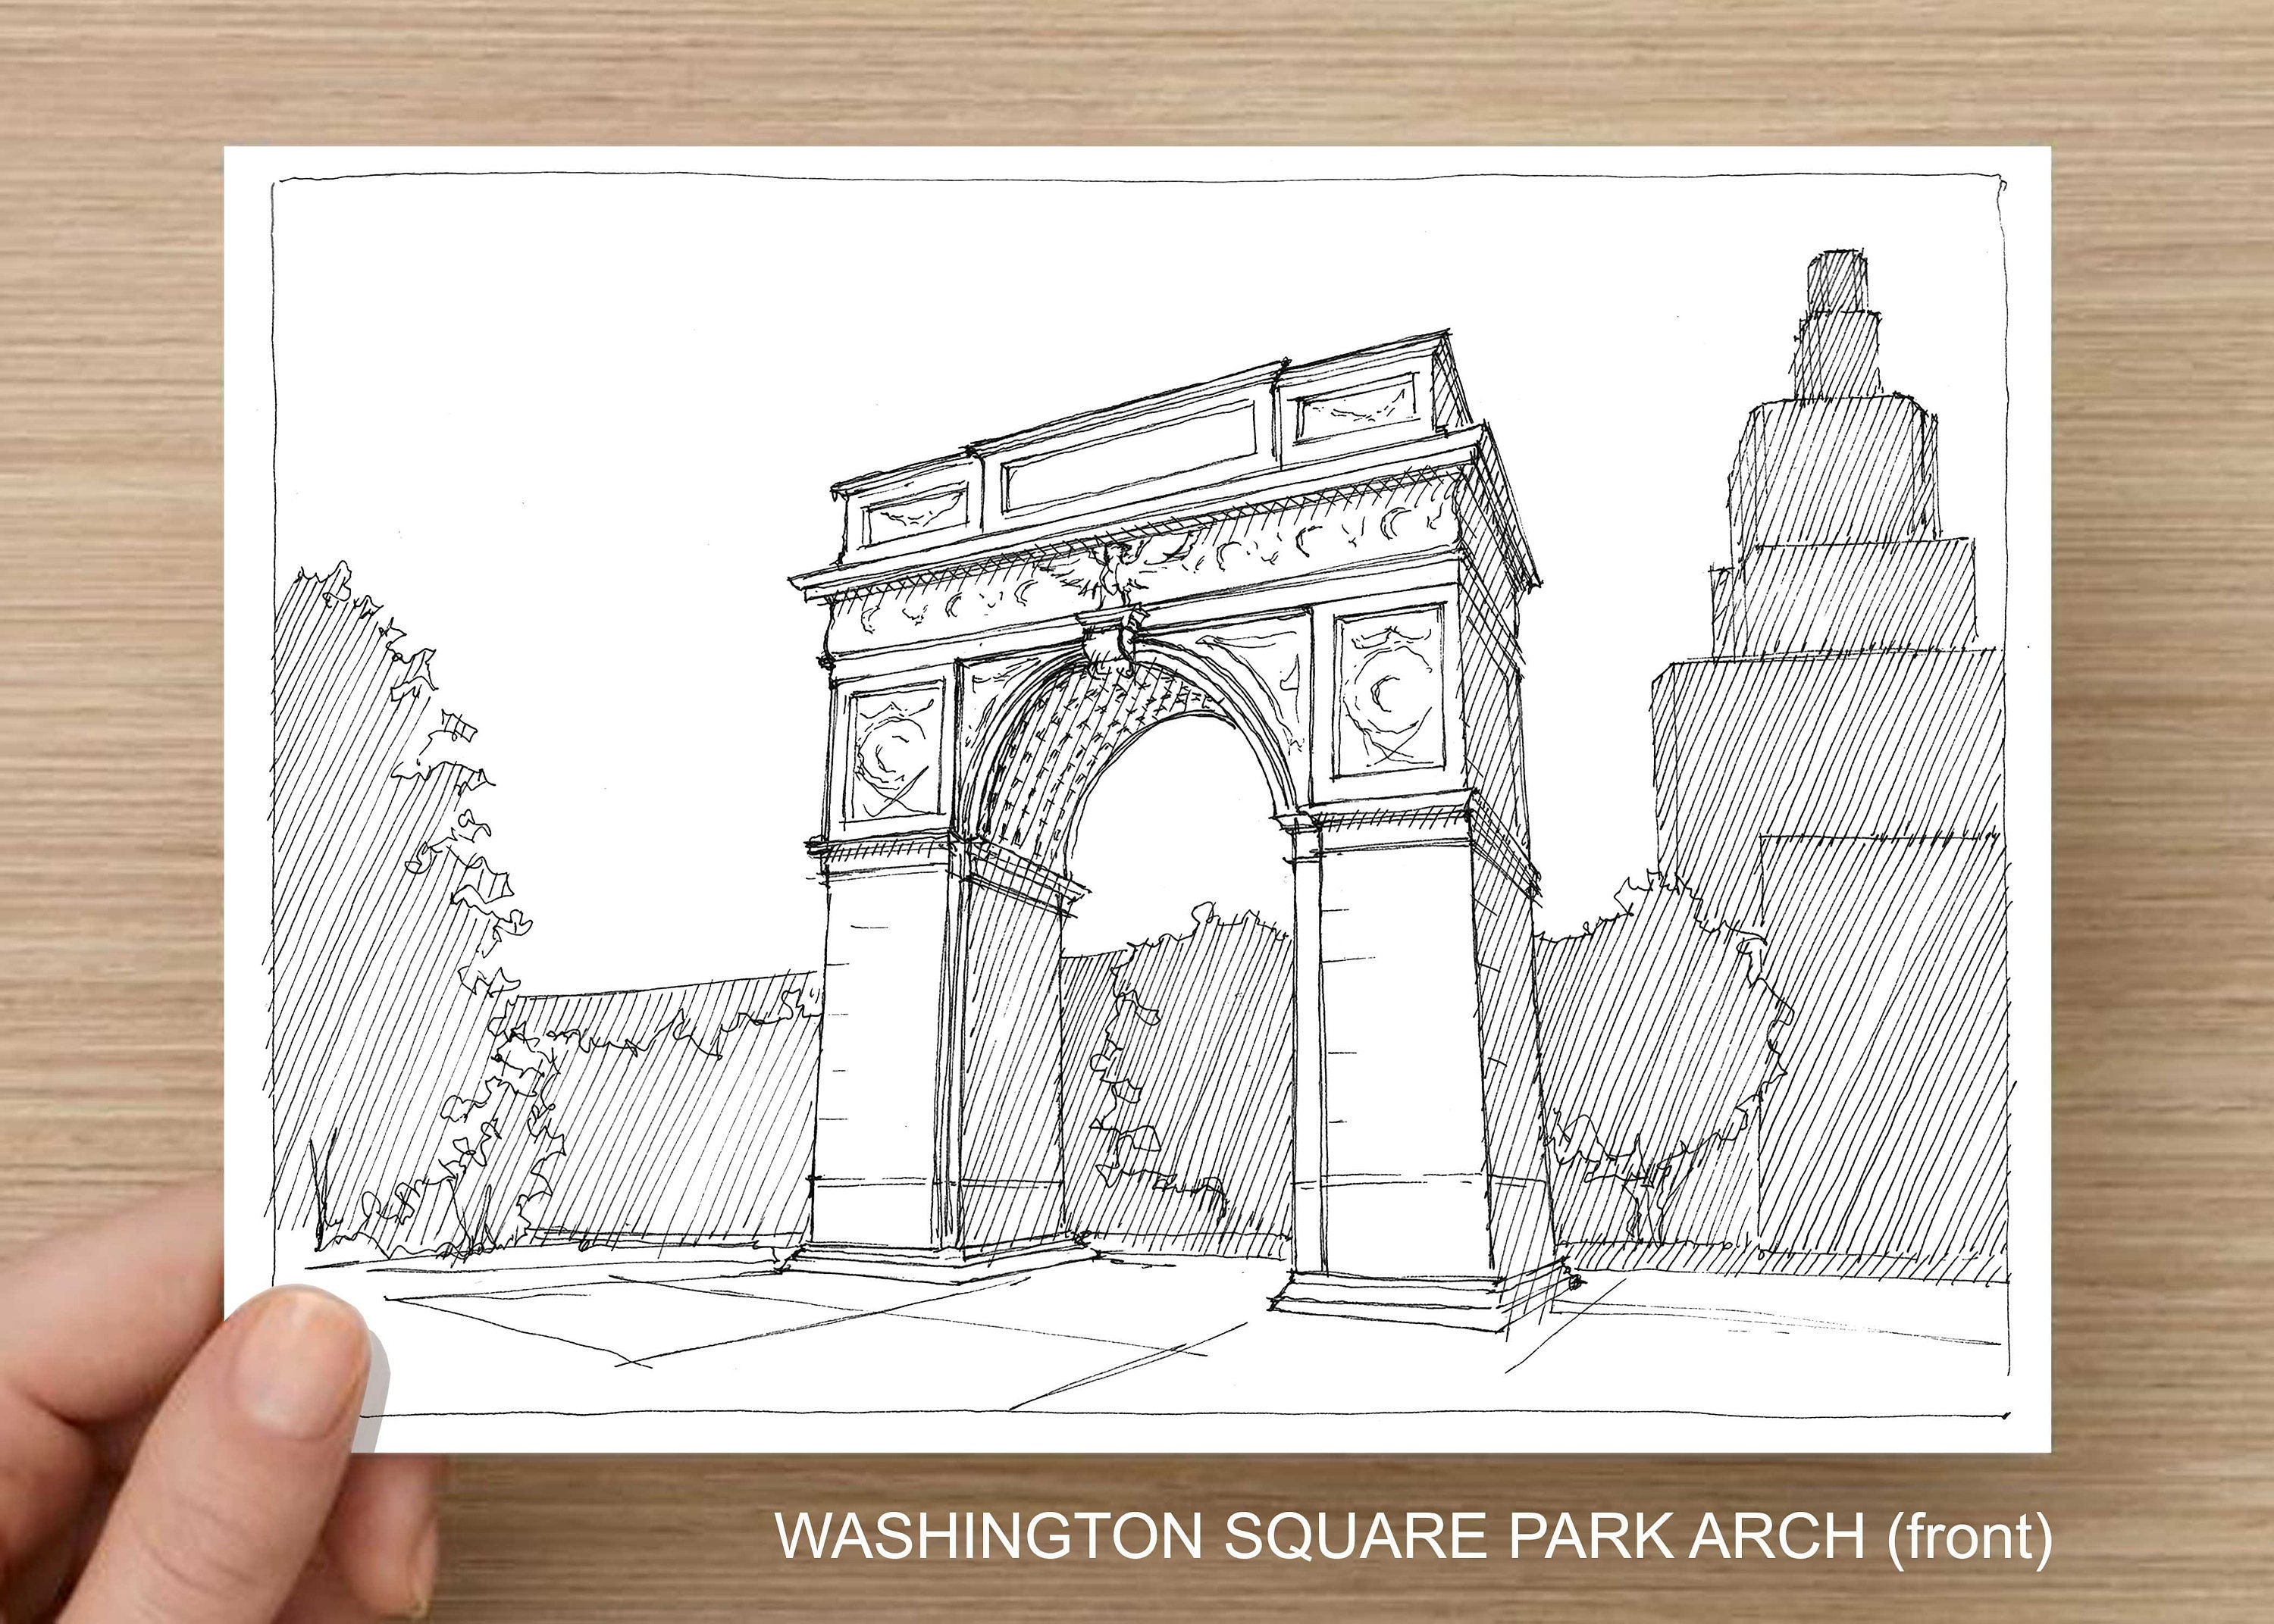 Etch A Sketch art goes for a spin in Washington Square Park - The